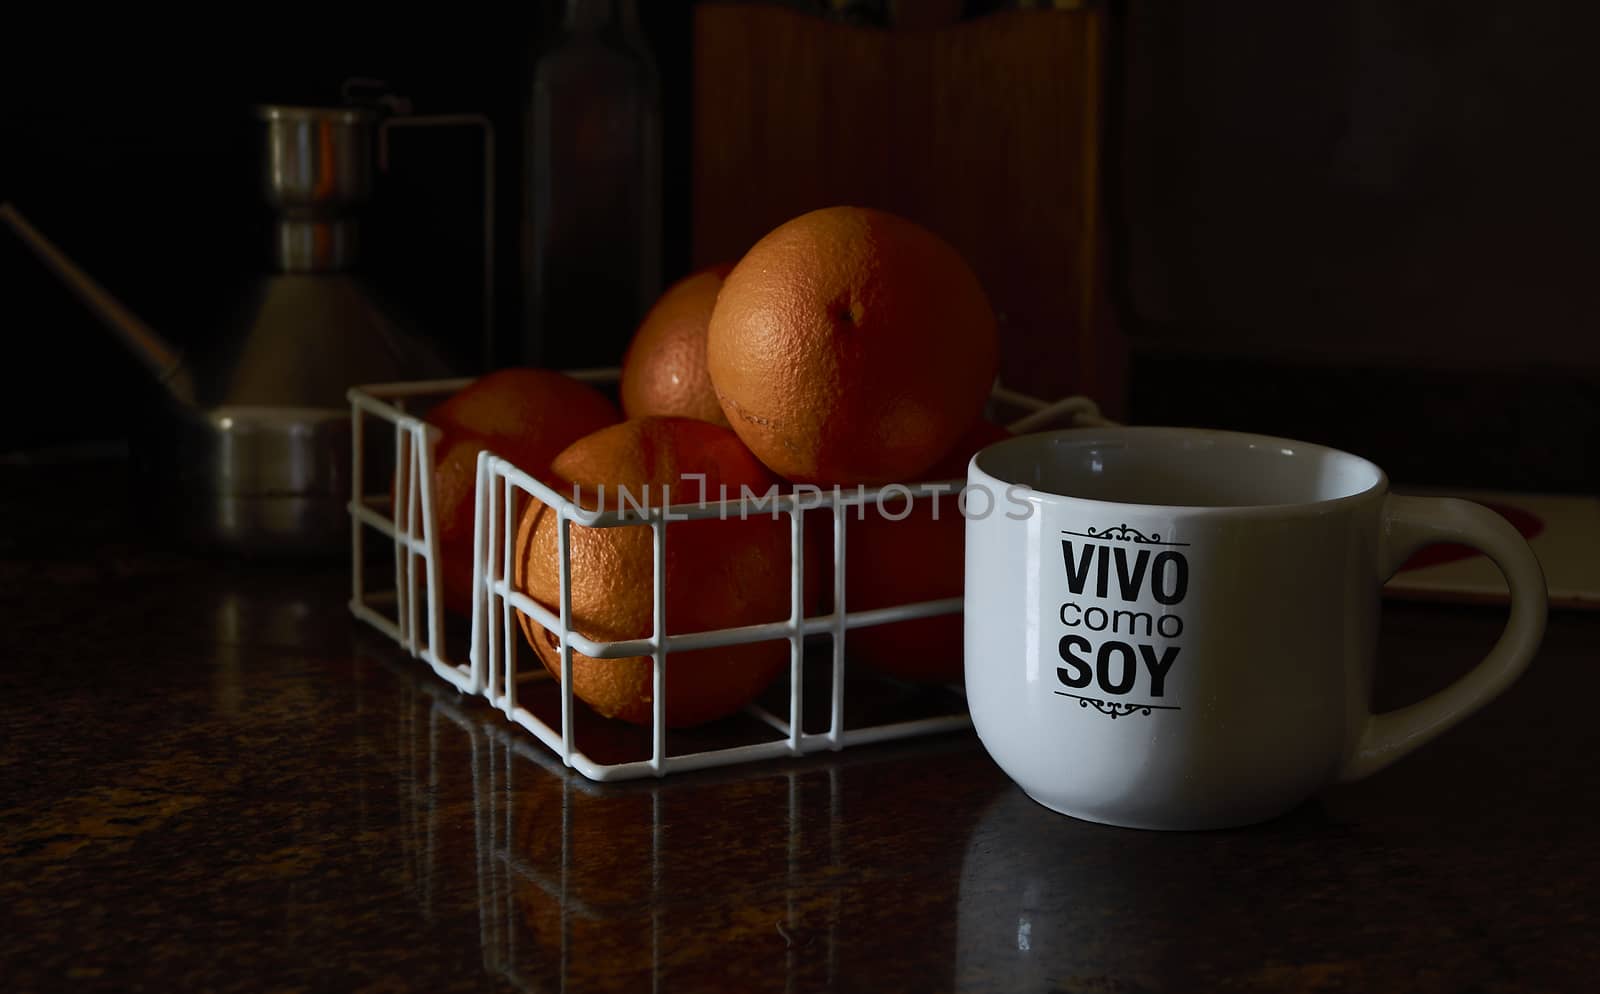 Breakfast with orange juice in a mug silk screened with live as I am